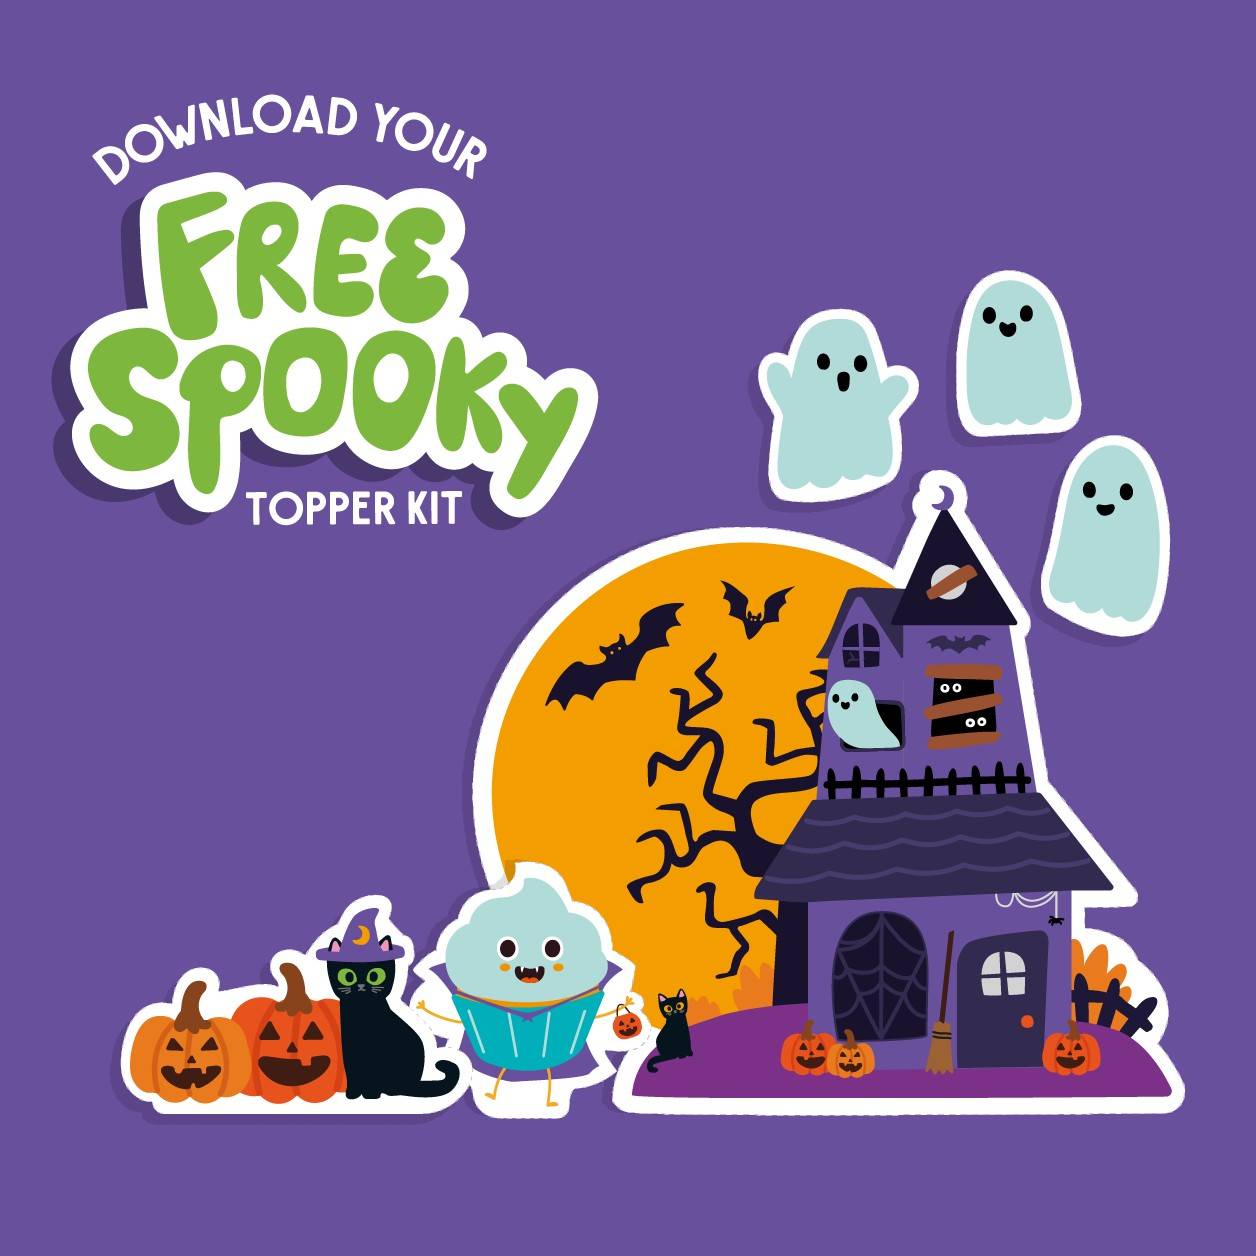 Download Your Free Spooky Topper Kit